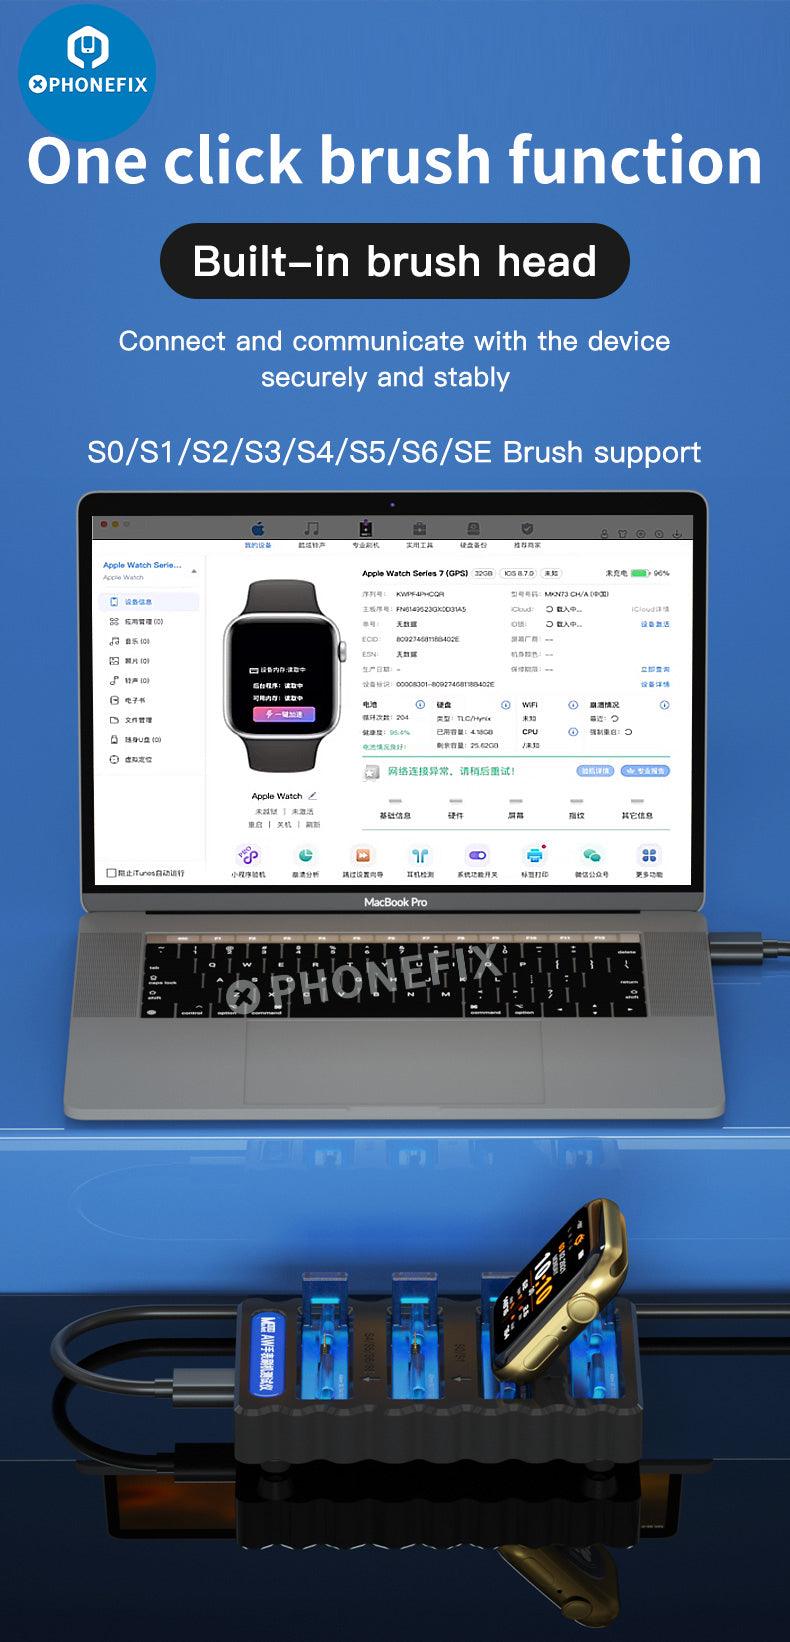 MaAnt AW Watch Brush Tester Recovery Tool For Apple iWatch S1-S6 - CHINA PHONEFIX